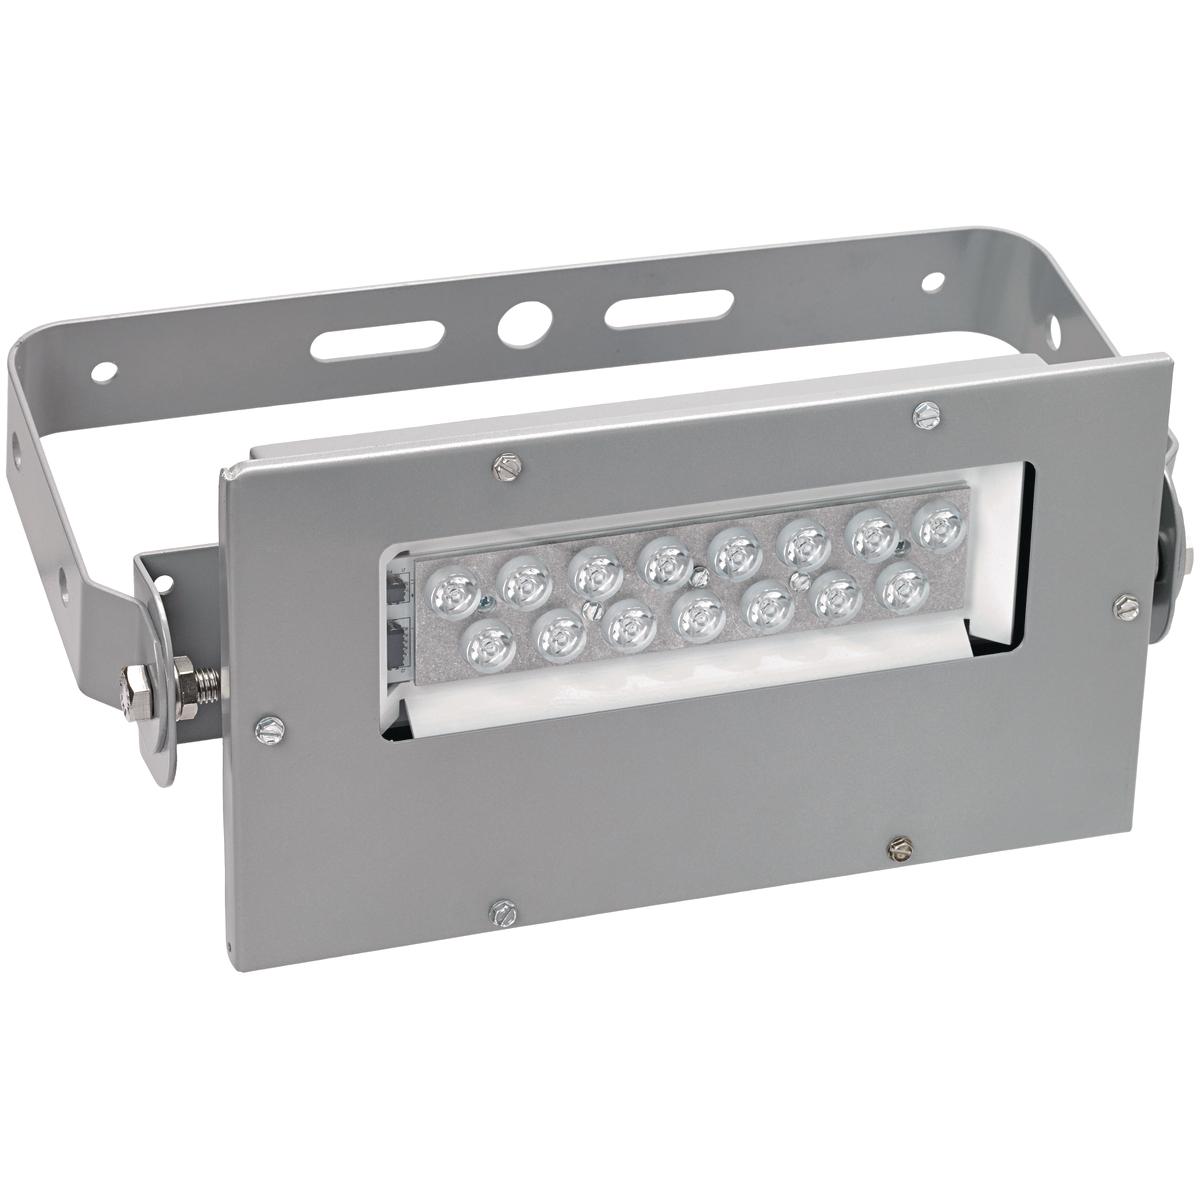 Hubbell KFLC1830 The KFLC Series compact LED floodlights are designed with a copper-free aluminum housing and painted with a powder epoxy finish for superior corrosion resistance in harsh and hazardous environments. Killark LED floodlights provide a crisp white light that